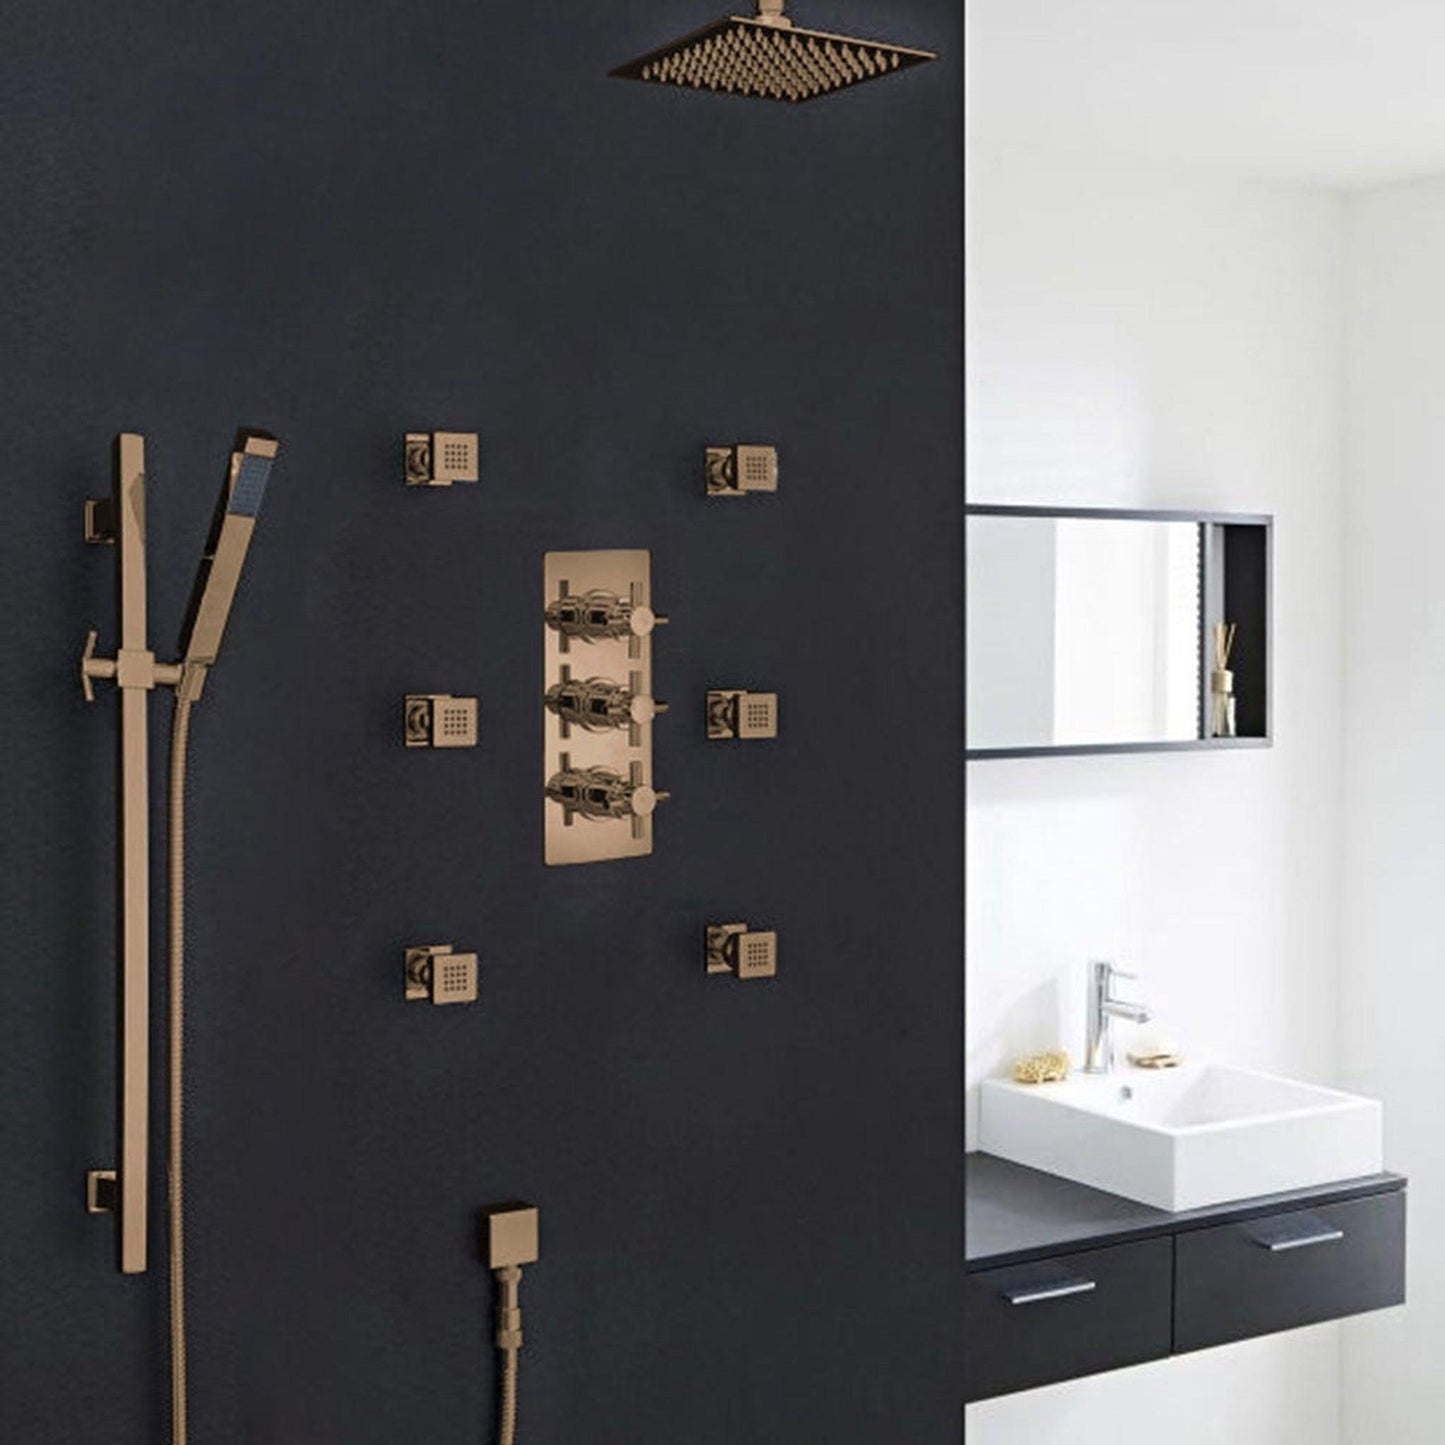 Fontana Reno 16" Oil Rubbed Bronze Square Ceiling Mounted Rainfall Shower System With 6-Body Massage Jets and Hand Shower